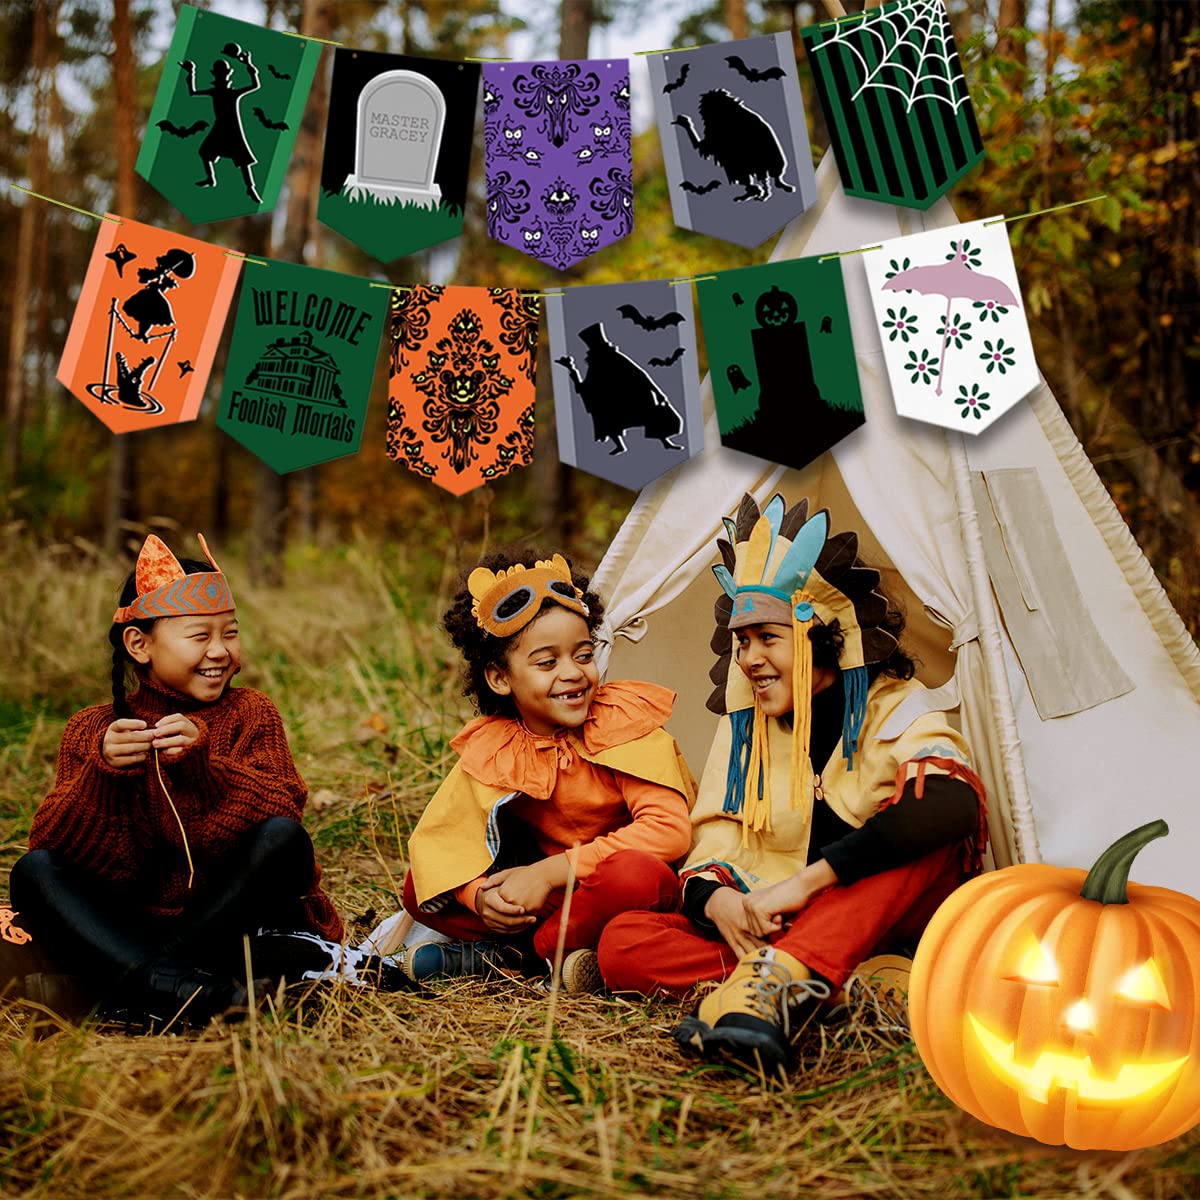 Haunted Mansion Decoration-Halloween Party Banner Decoration,11pcs Halloween Hitchhiking Ghosts Hanging Fireplace Banner Garland for Happy Halloween Party Decoration